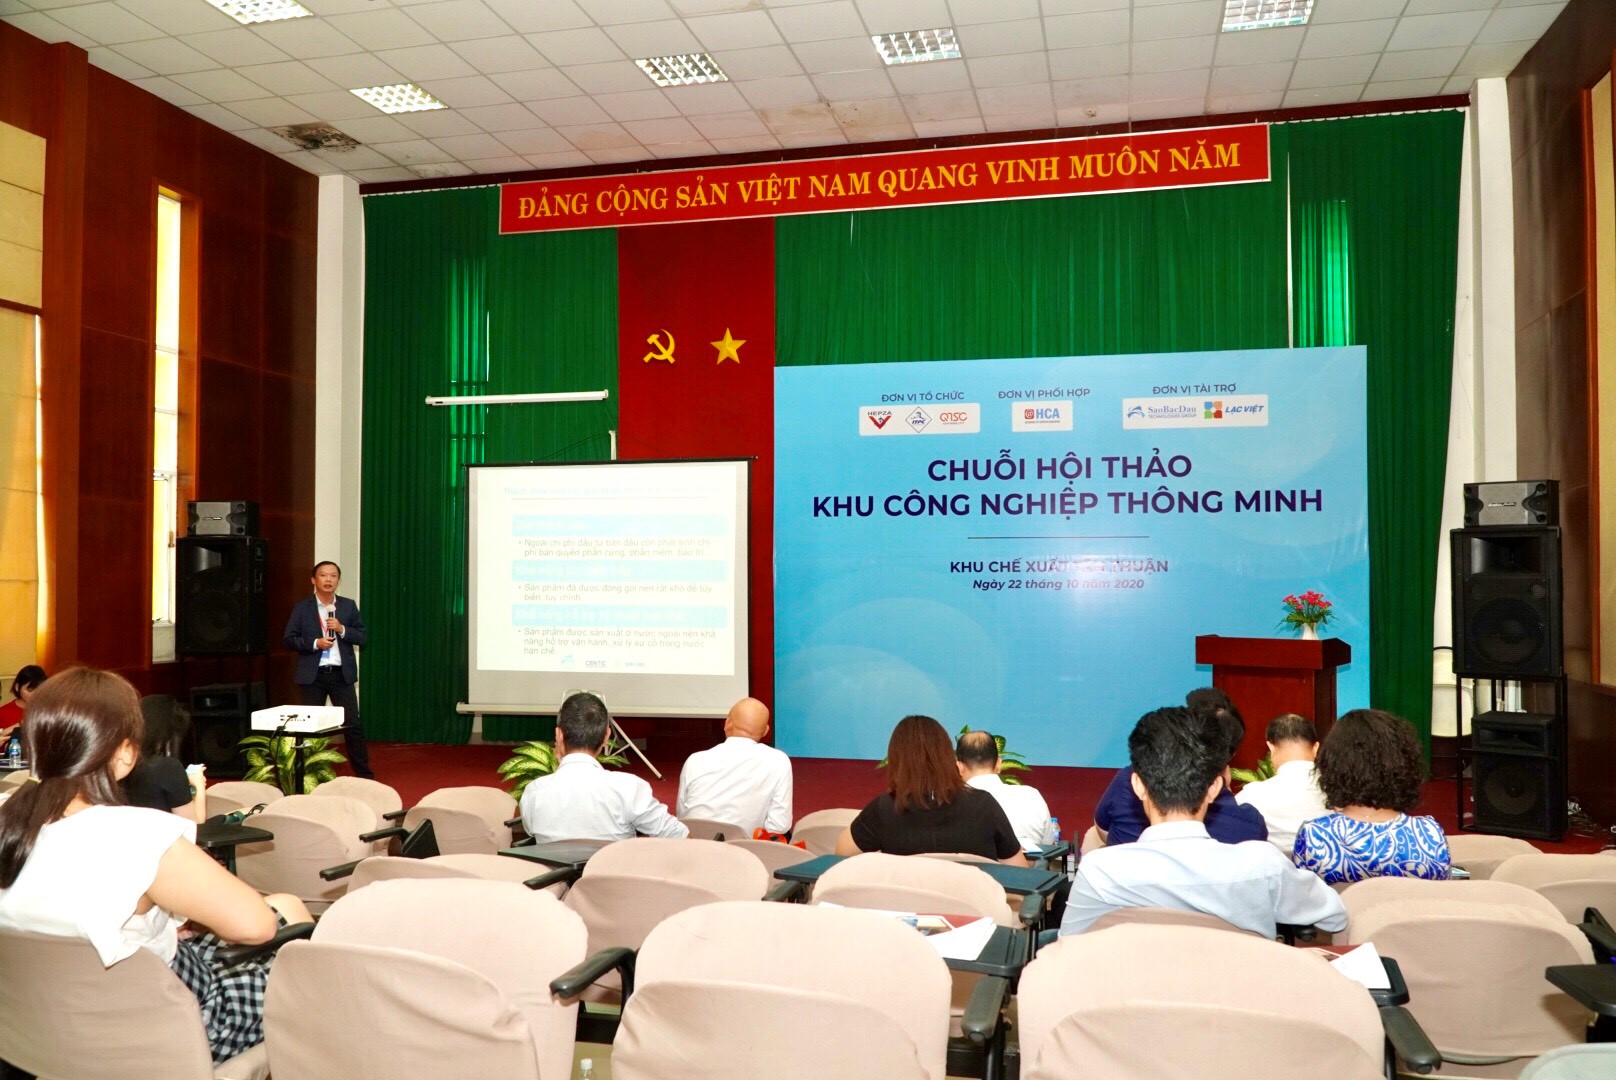 Introduction to Environmental Monitoring Solution at Conference of the Smart Industrial Park